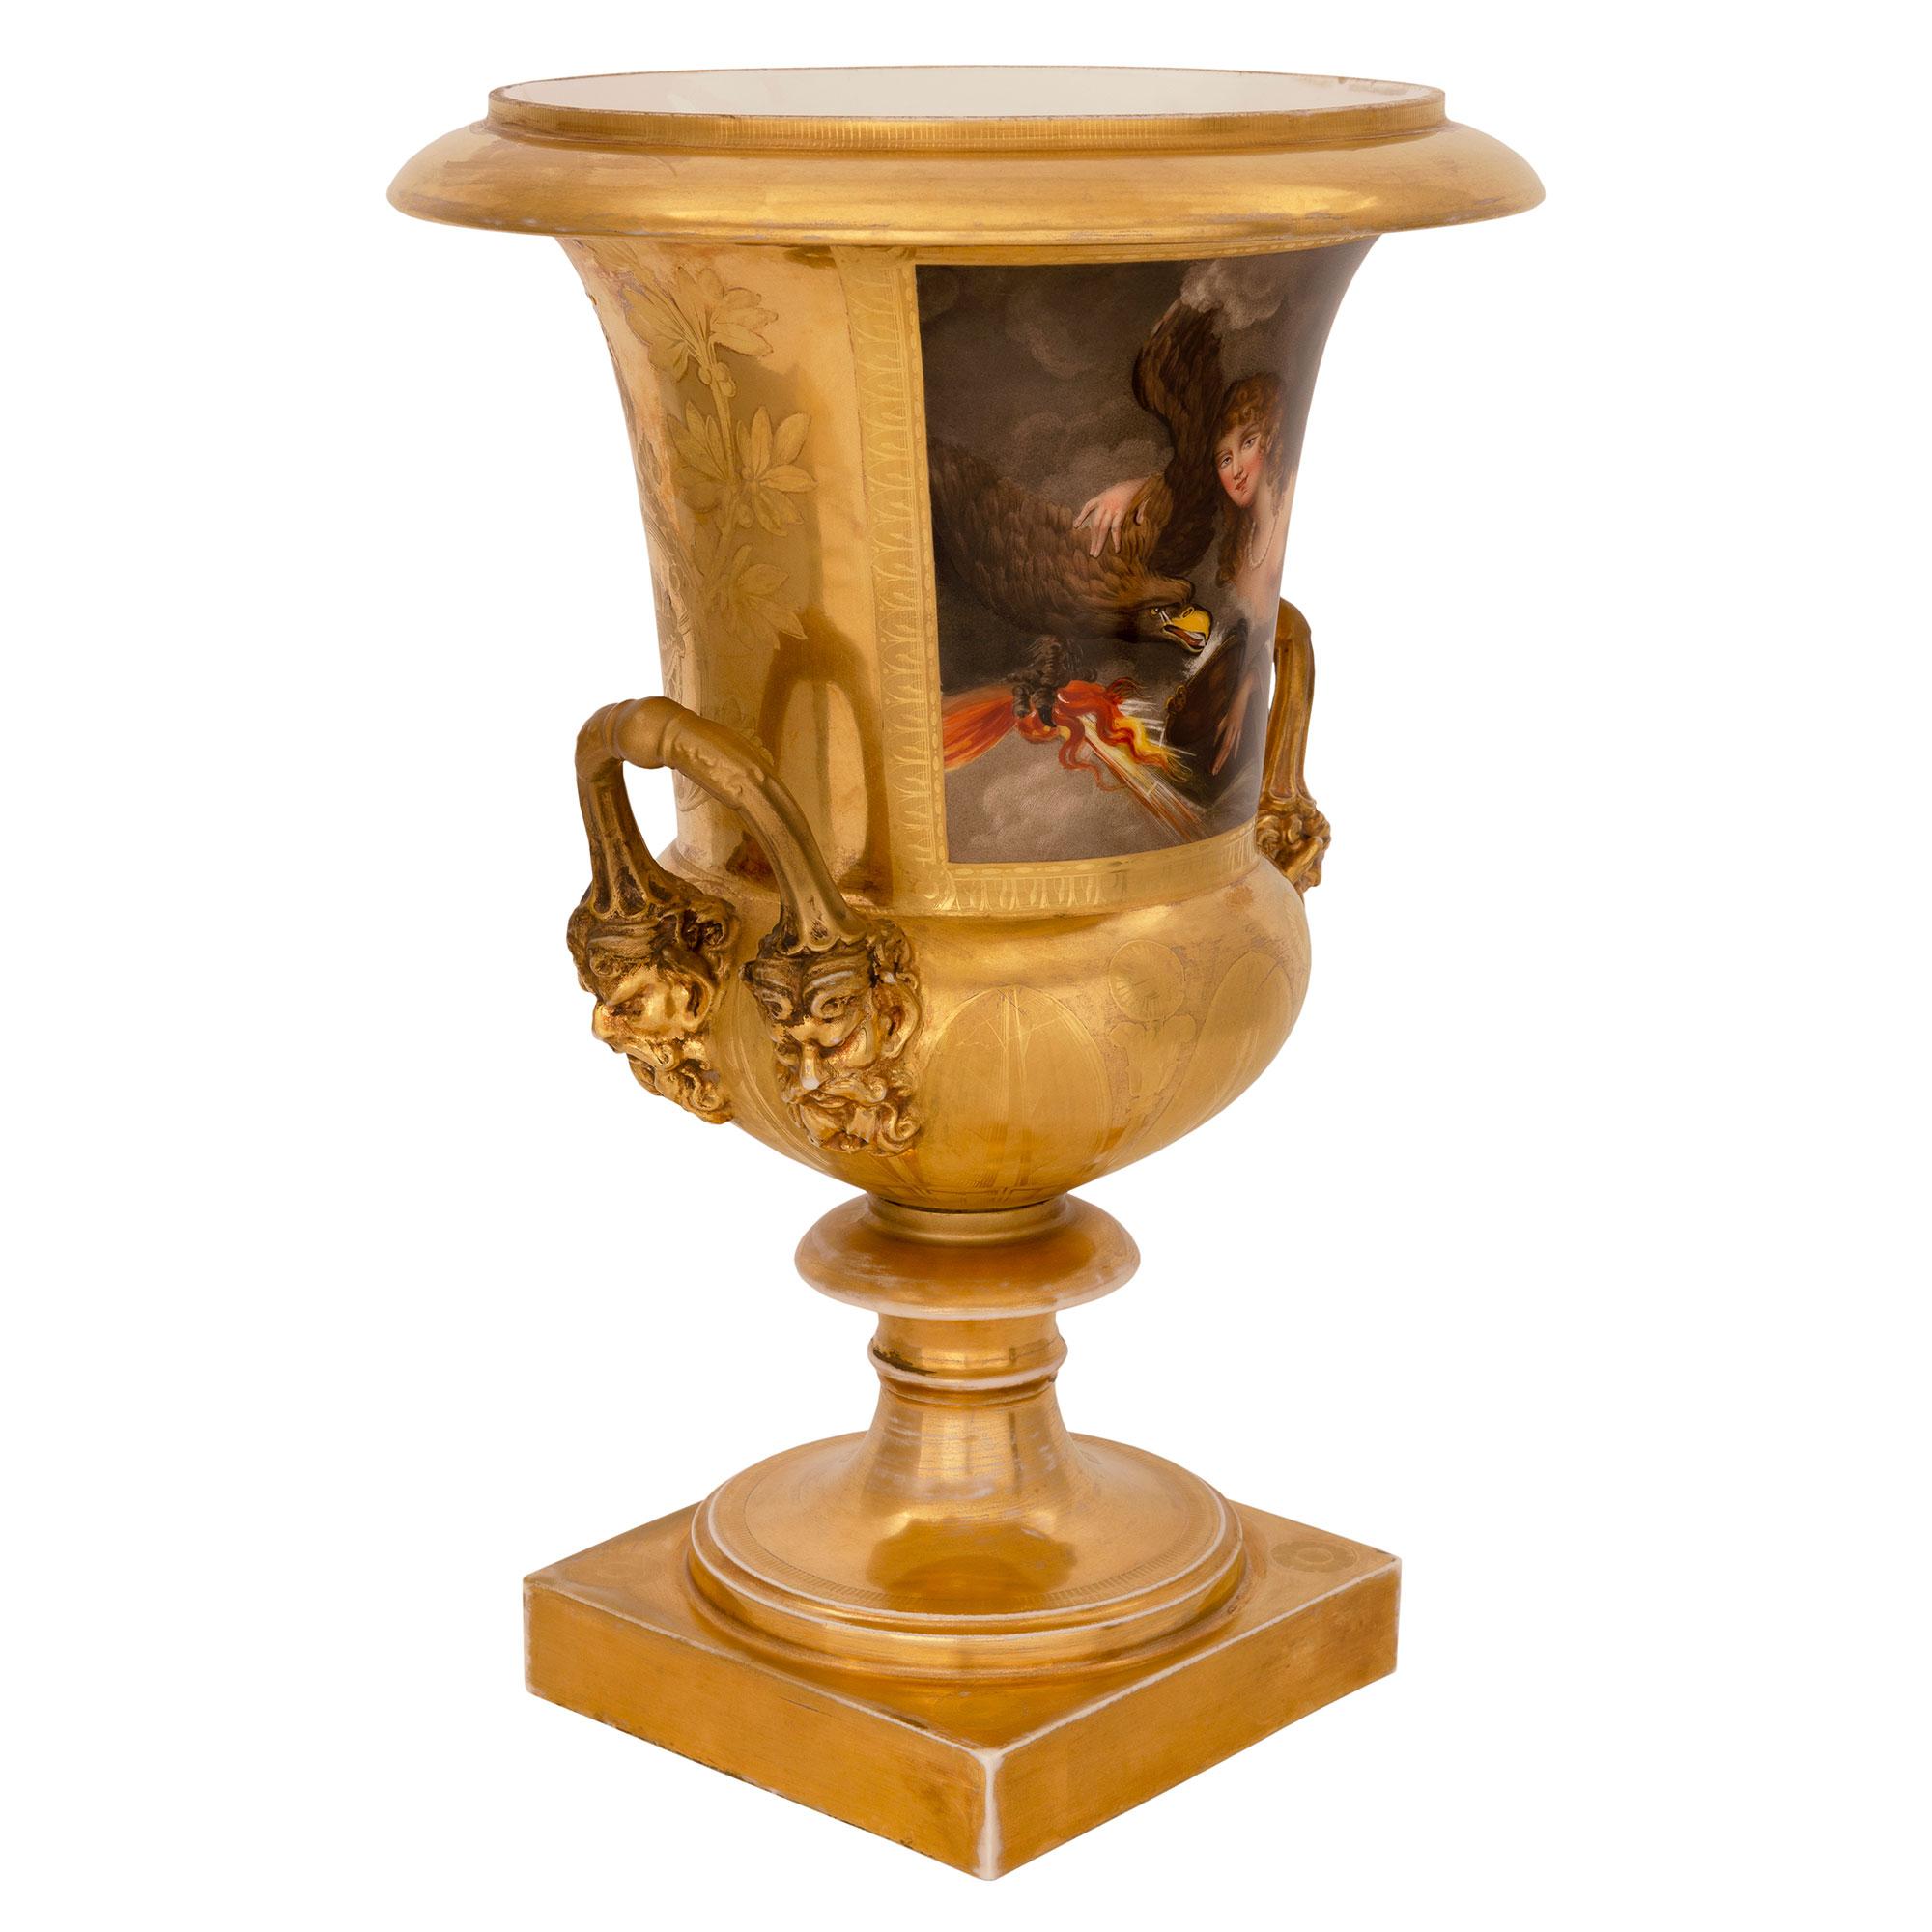 A most elegant pair of French 19th century neo-classical st. Porcelain de Paris urns. Each urn is raised by a square base below an elegant mottled socle shaped pedestal. The bodies display lovely finely etched gilt leaves with striking bearded satyr